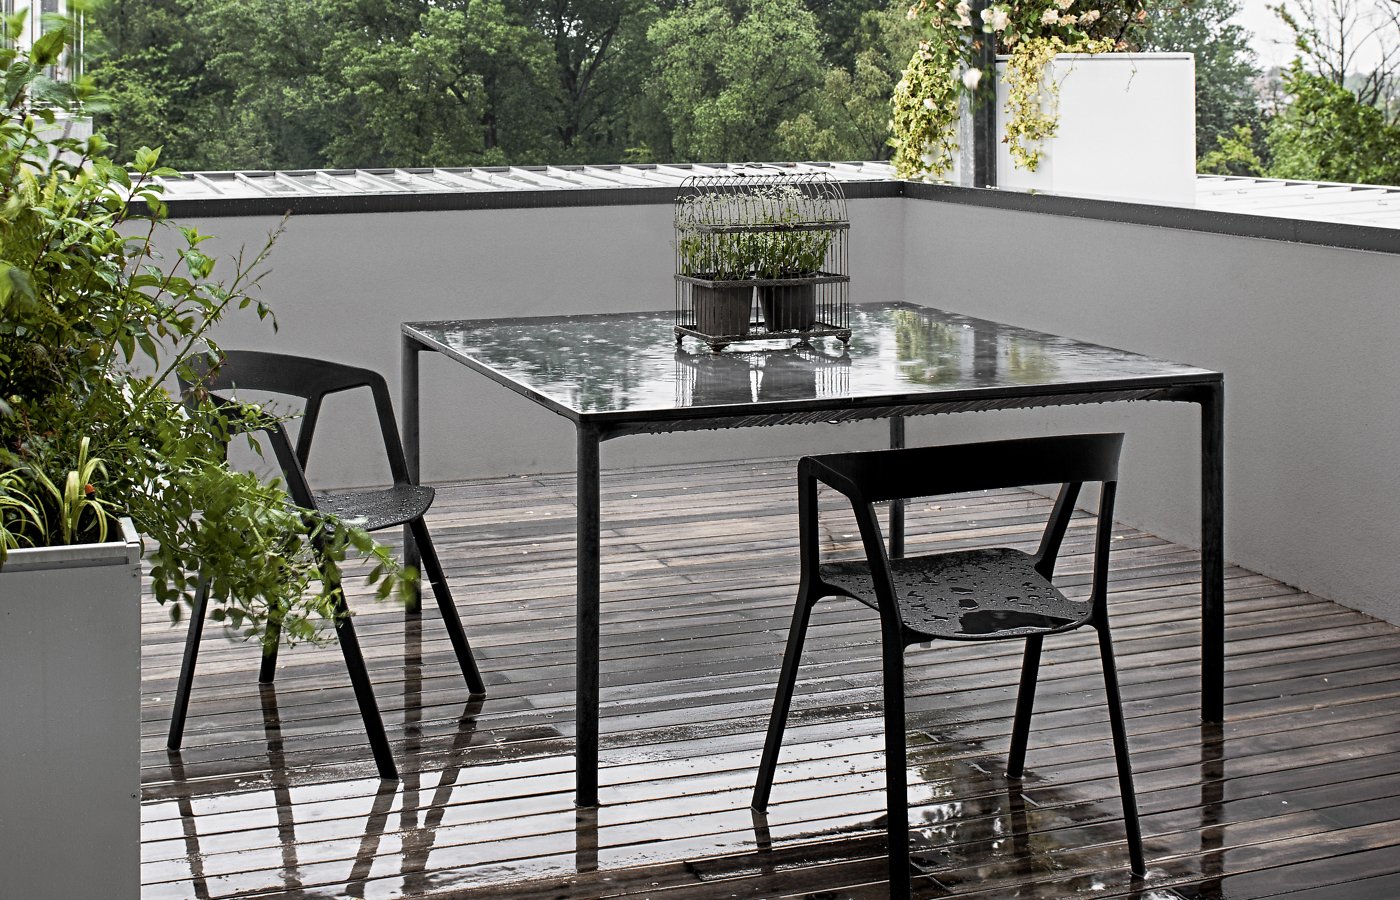 Boiacca Dining Table from Kristalia, designed by Lucidipevere